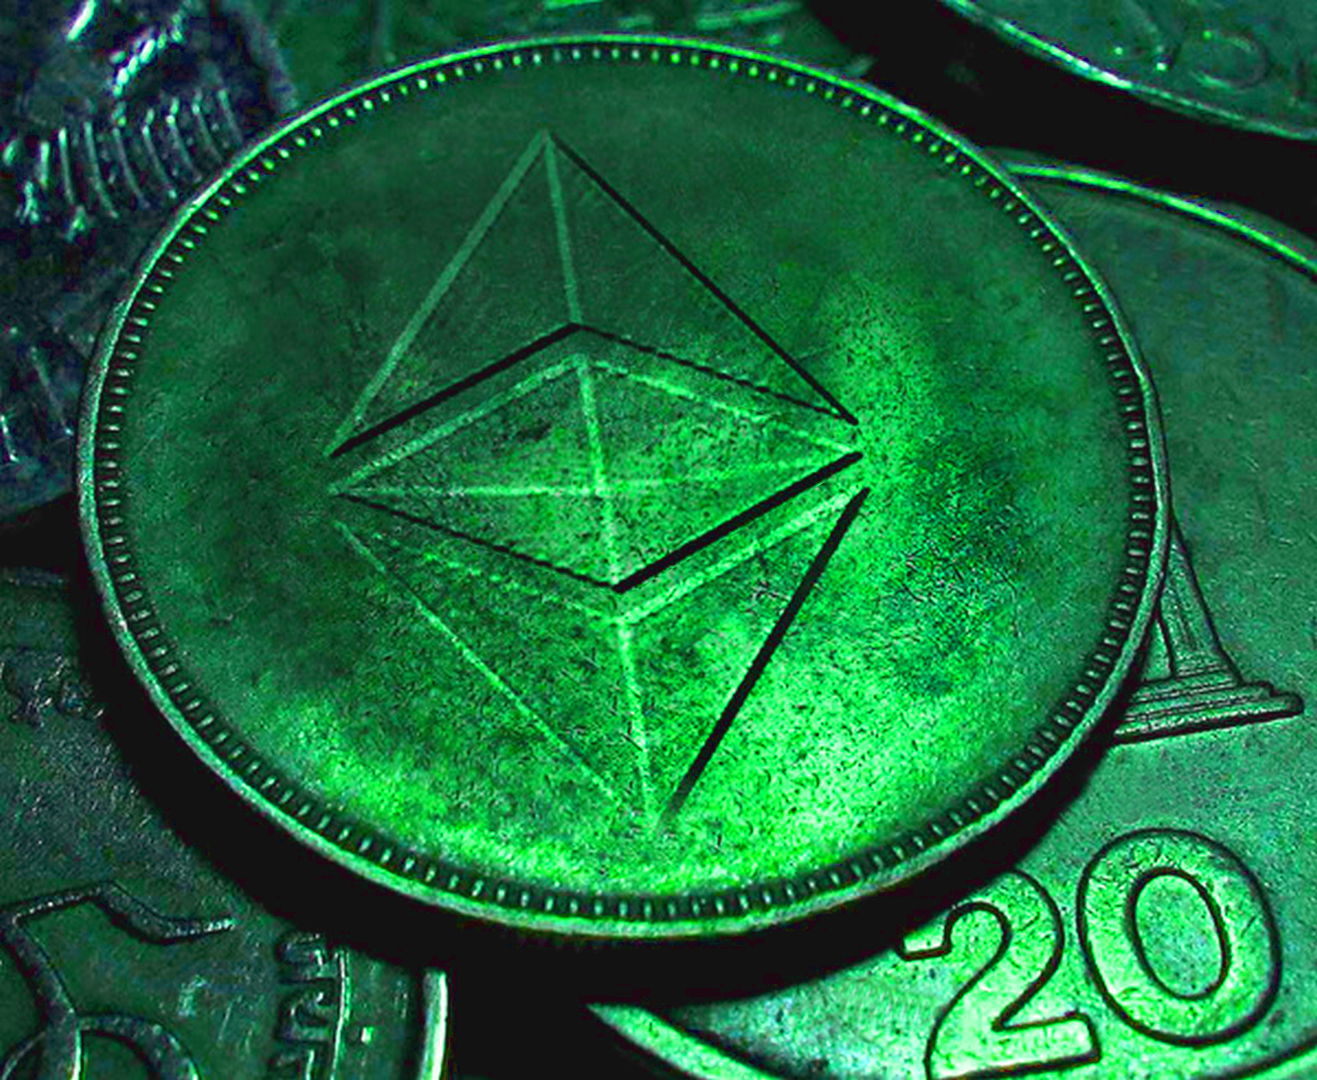 Ethereum Classic, Bitcoin Gold Skyrocket Amid Wider Crypto Market Recovery